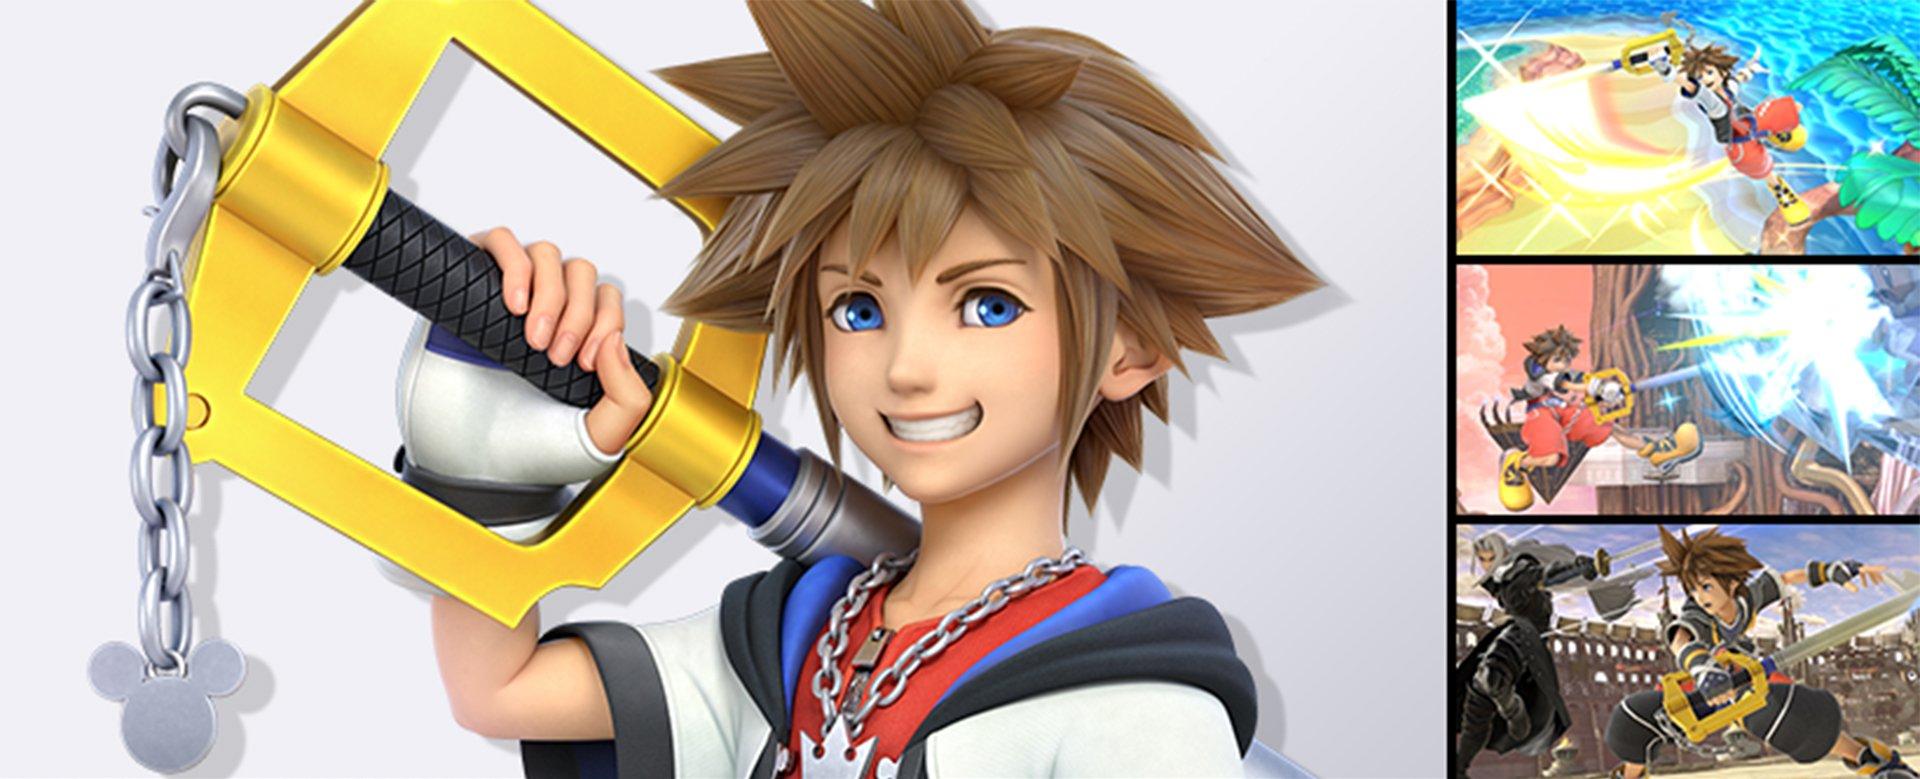 Super Smash Bros. Ultimate update adds support for the Sora amiibo